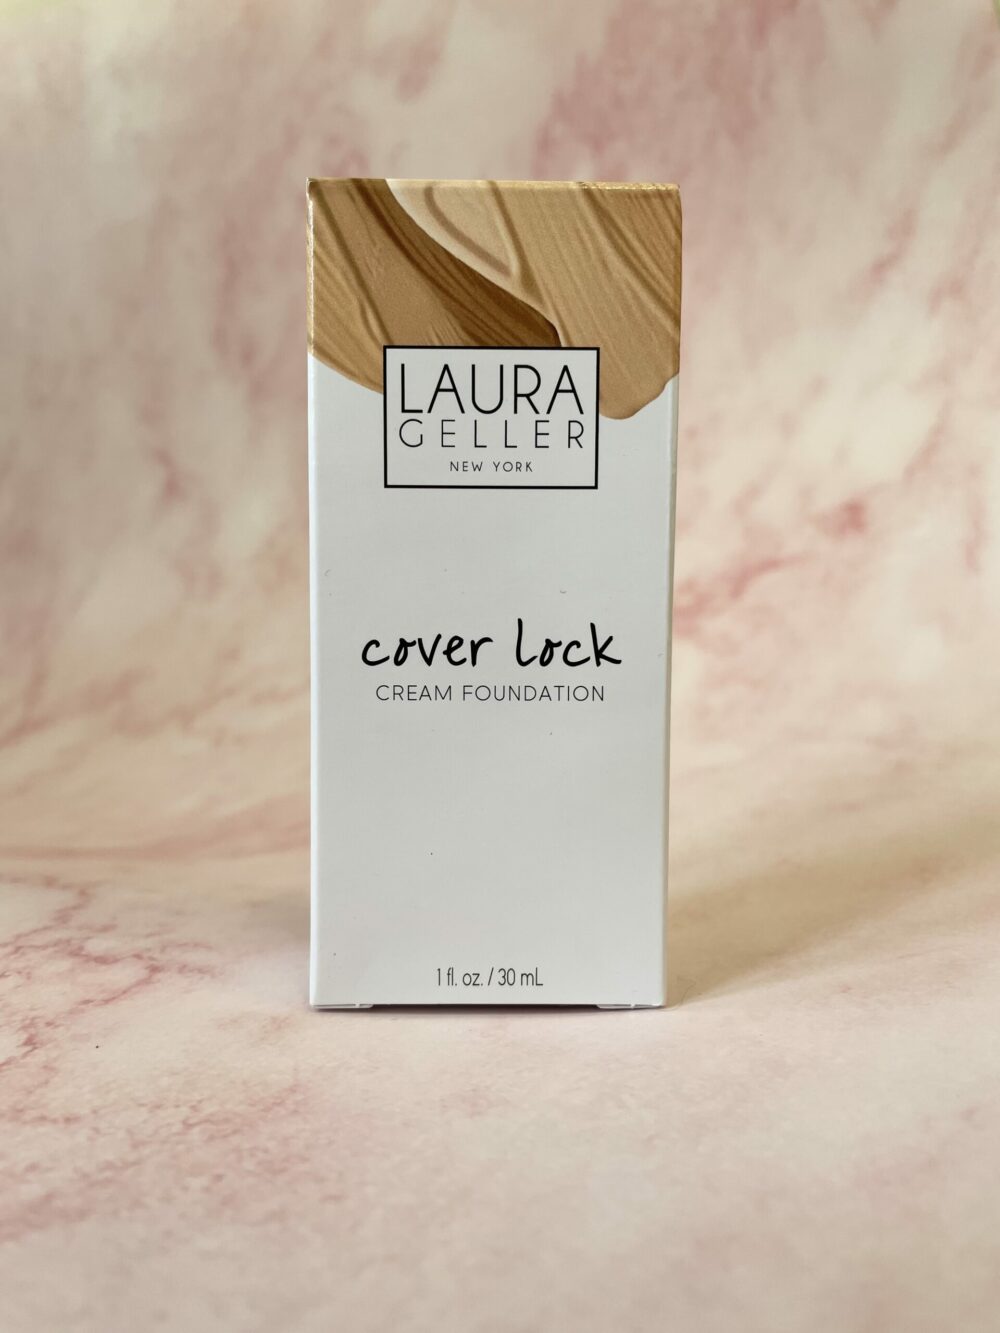 Strawberry Week | Period Self Care Subscription | Laura Geller Cover Lock Cream Foundation 30ml (Various Shades)